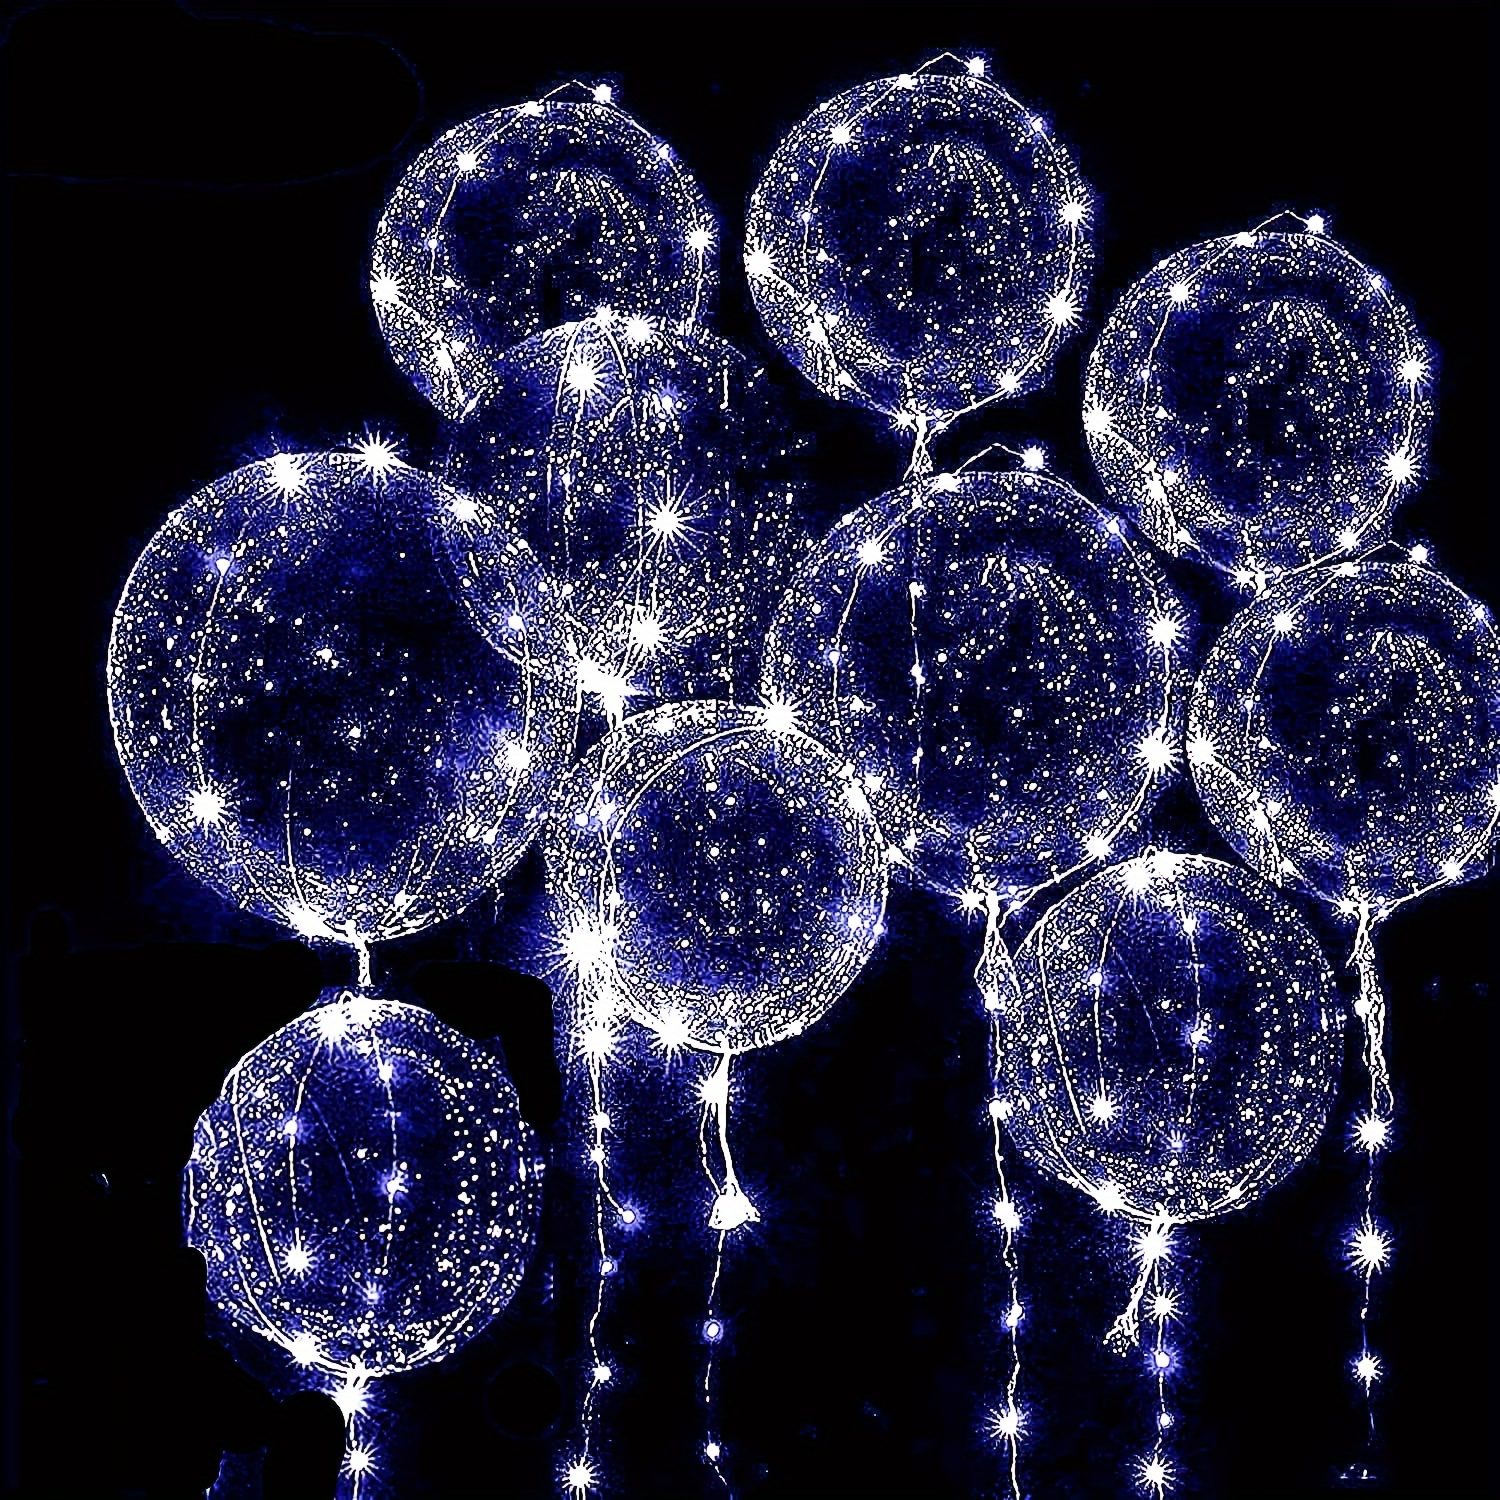 

7pcs Led Lighted Clear Balloons Wedding Balloons Wedding Party Birthday Decoration Bachelorette Party Glowing Bobble Balls